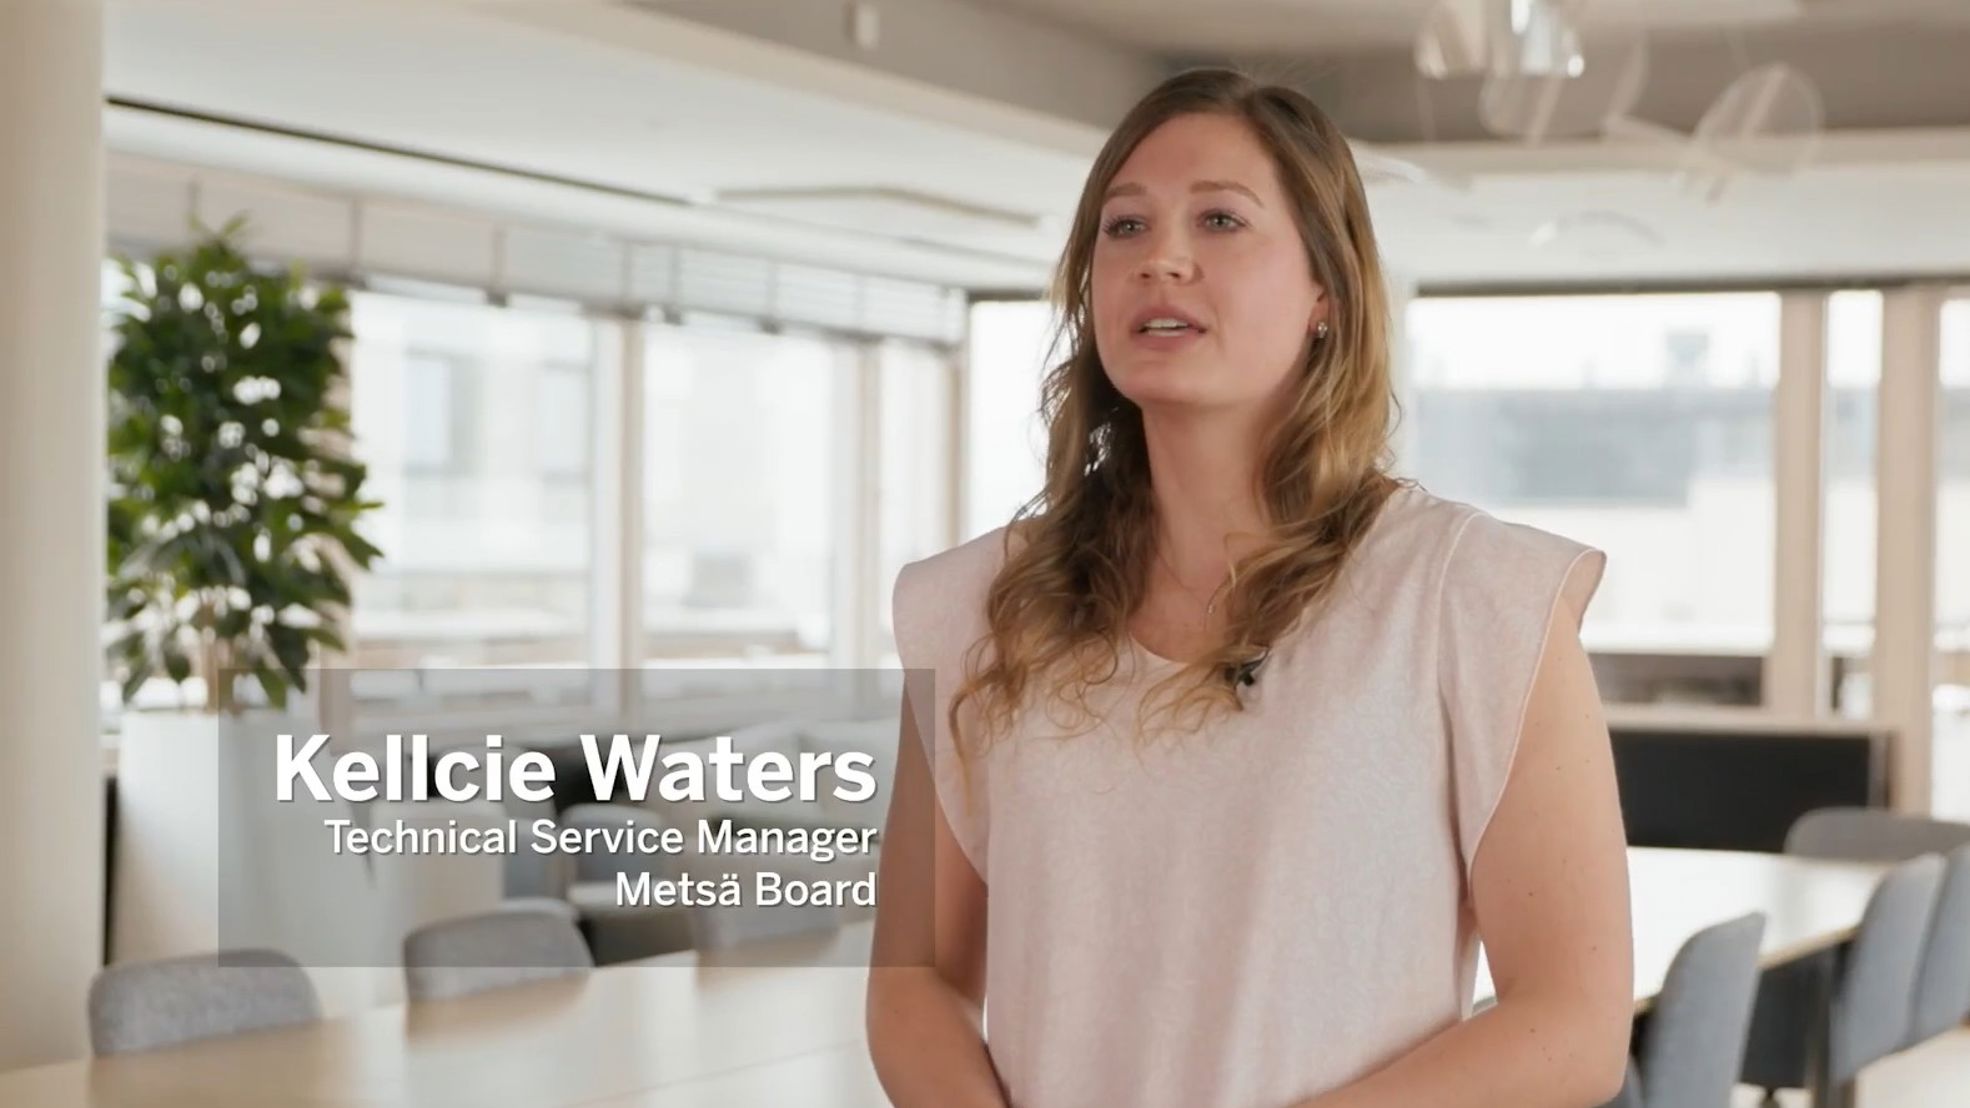 Kellcie Waters, Technical Service Manager